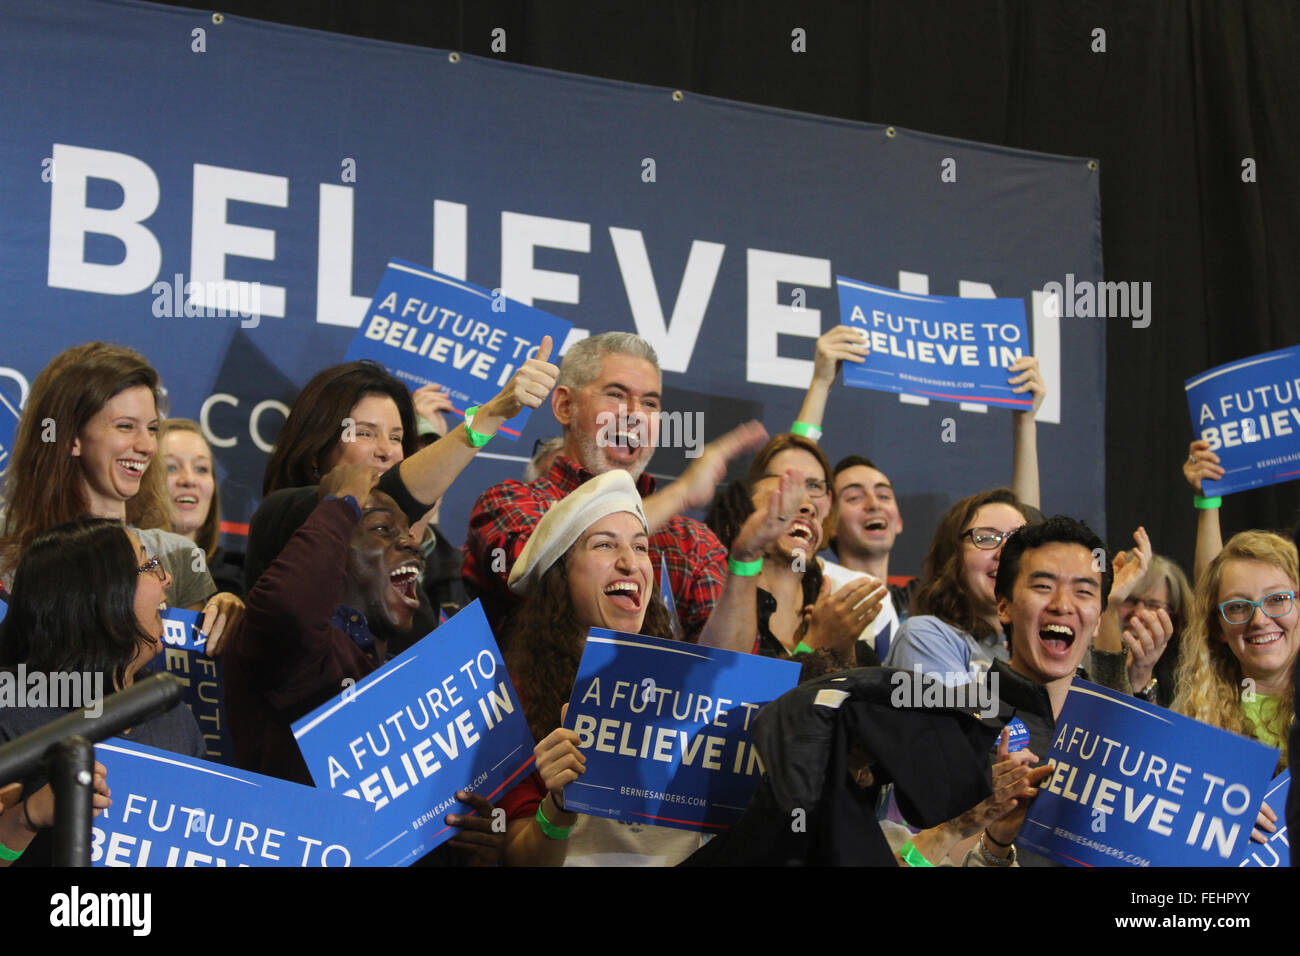 Portsmouth, New Hampshire, USA. 7th February, 2016. Supporters cheer for Bernie Sanders, candidate for President in the Democratic primary, at the Bernie Sanders Get Out the Vote rally two days before New Hampshire's Presidential primary vote. Credit:  Susan Pease/Alamy Live News Stock Photo